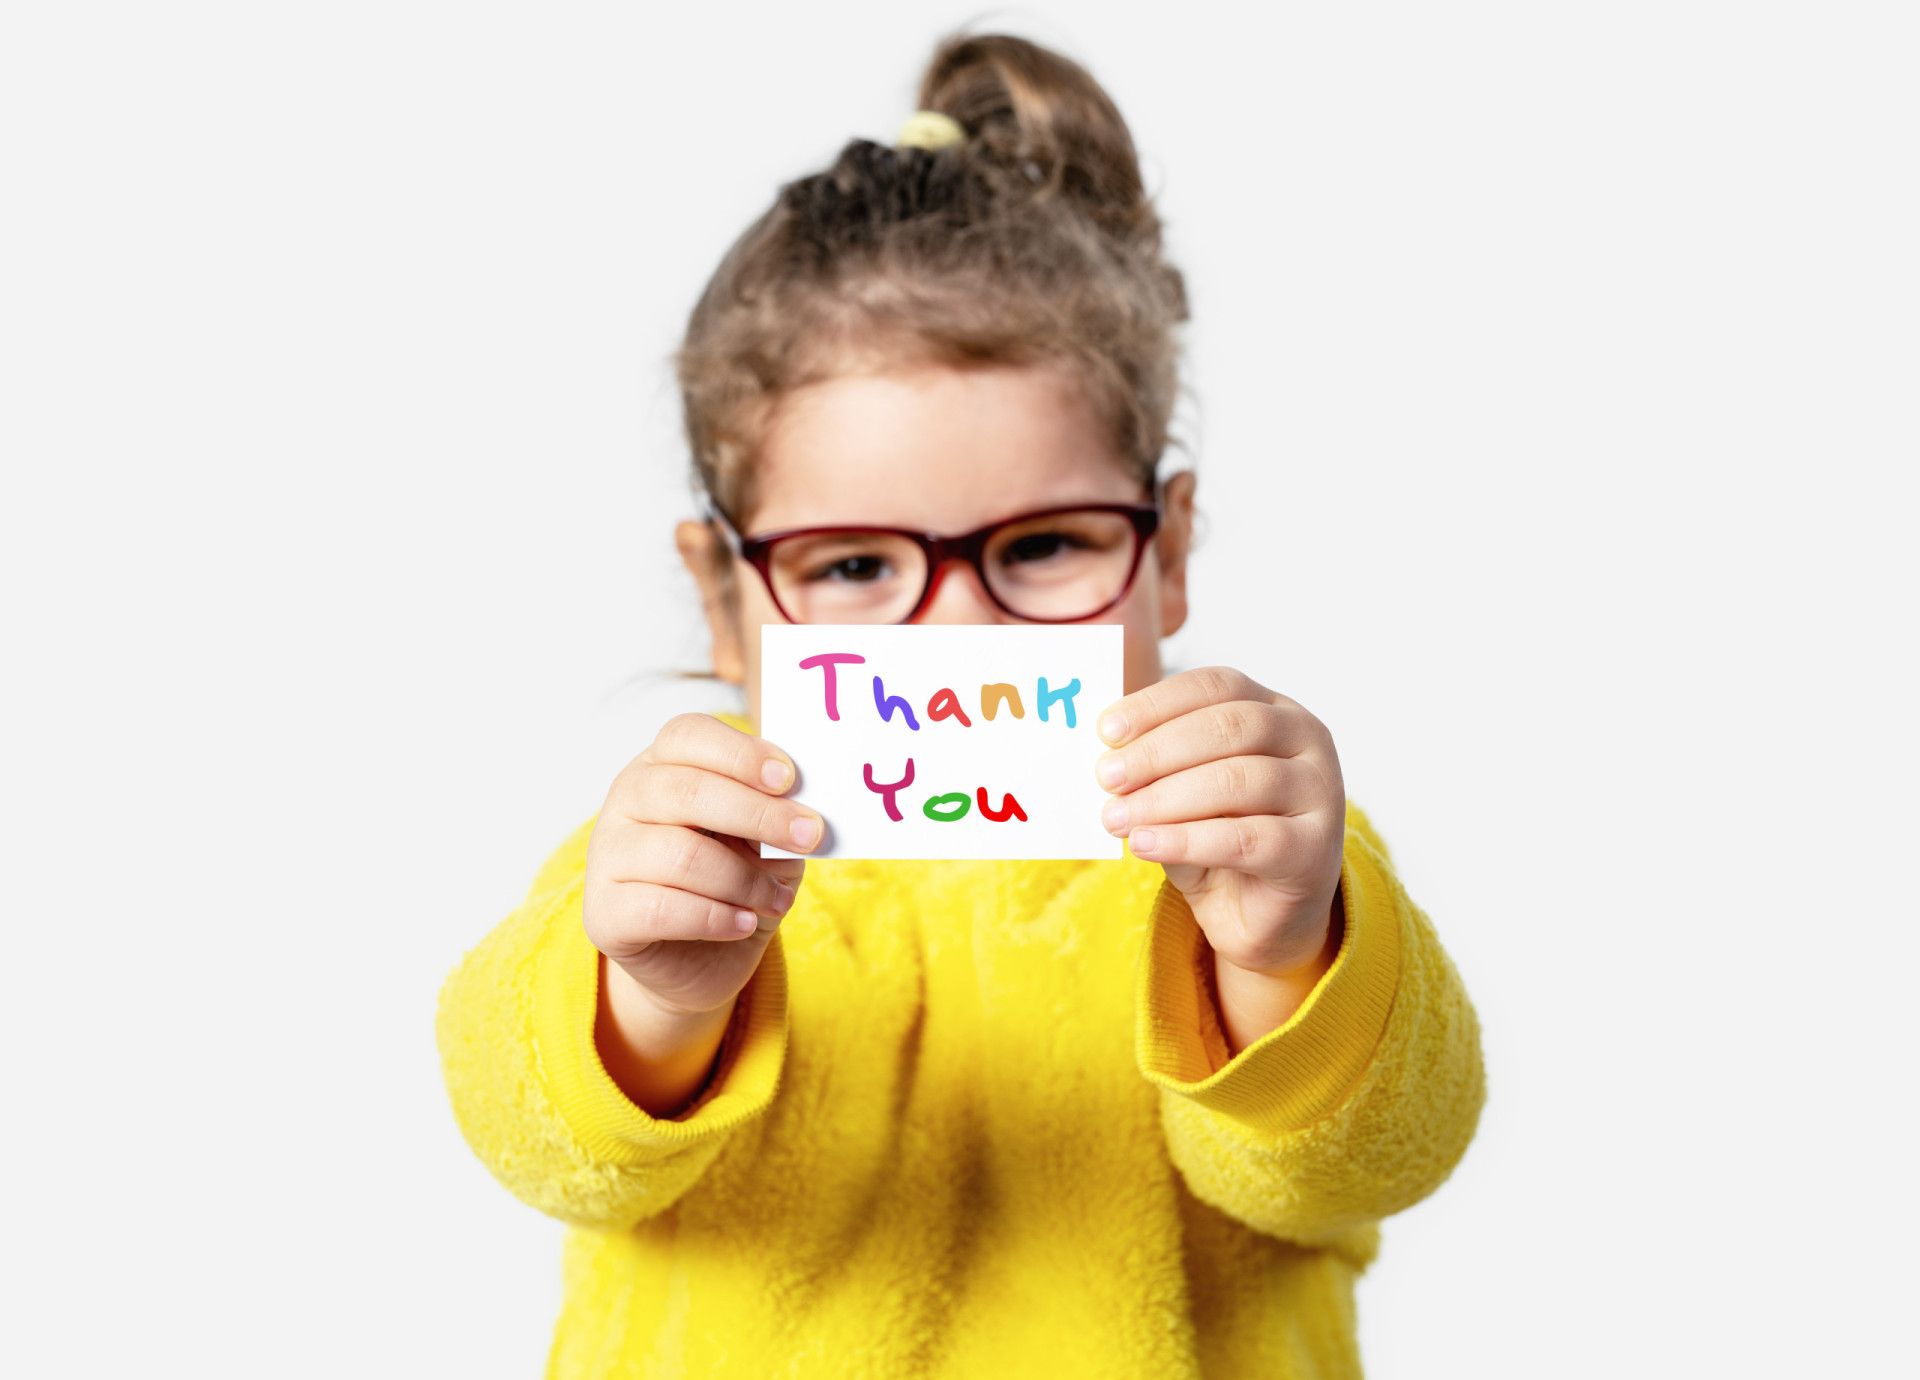 <p>Encouraging kids to send thank you cards teaches them the art of appreciation, and expressing gratitude in a thoughtful and meaningful way.</p> <p>Sources: (Our Family Wizard) (Parents)</p> <p>See also: <a href="https://www.starsinsider.com/lifestyle/524695/how-to-talk-to-children-about-stress">How to talk to children about stress</a></p><p>You may also like:<a href="https://www.starsinsider.com/n/304638?utm_source=msn.com&utm_medium=display&utm_campaign=referral_description&utm_content=588009en-en"> Funny celebrity moments: pranksters on the red carpet</a></p>